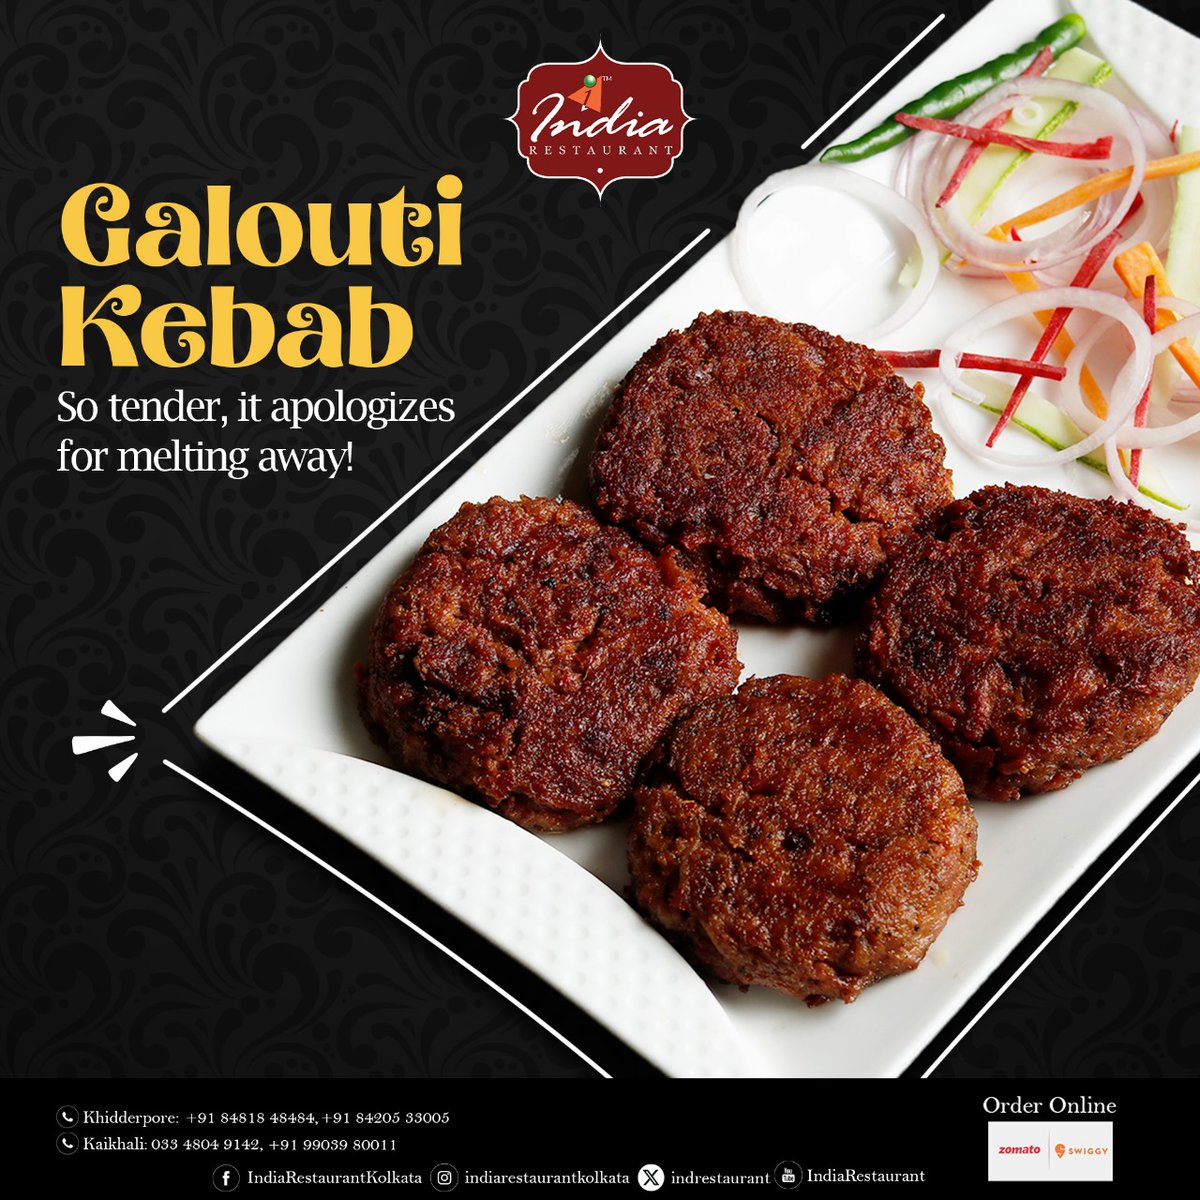 Experience exquisite flavors with Galouti Kebab. Delightfully tender, incredibly aromatic.

#IndiaRestaurant #KolkataRestaurants #IndianDelicacy #DeliciousDelights #DeliciousMeal #EatWithIndiaRestaurant #EatAtIndiaRestaurant #GaloutiKebab #FlavorfulBites